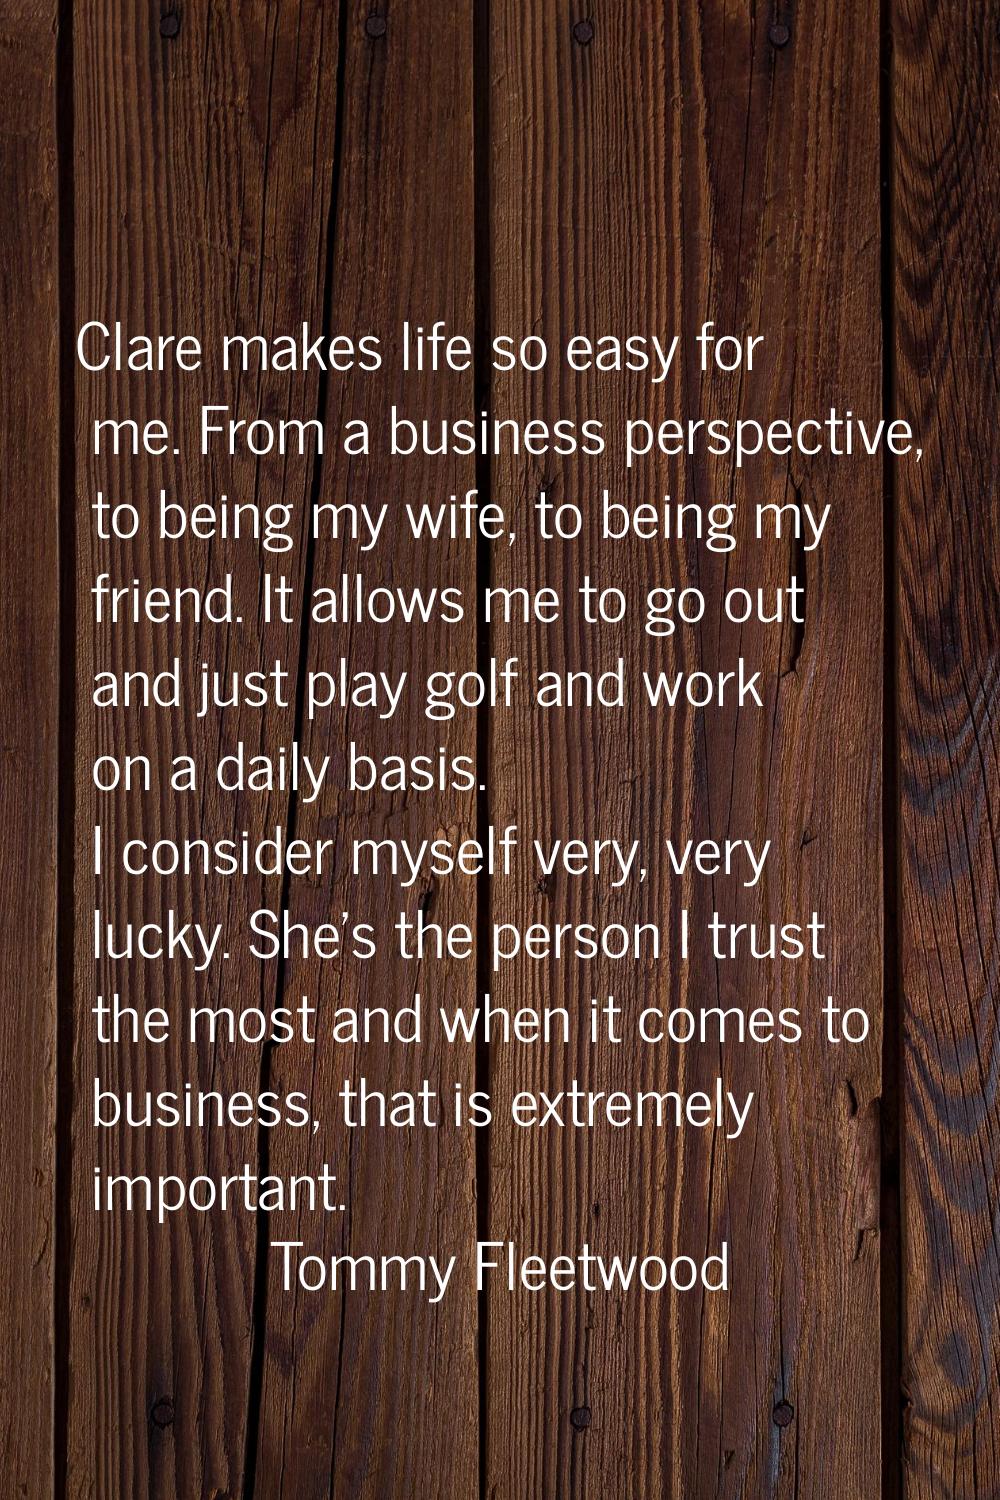 Clare makes life so easy for me. From a business perspective, to being my wife, to being my friend.